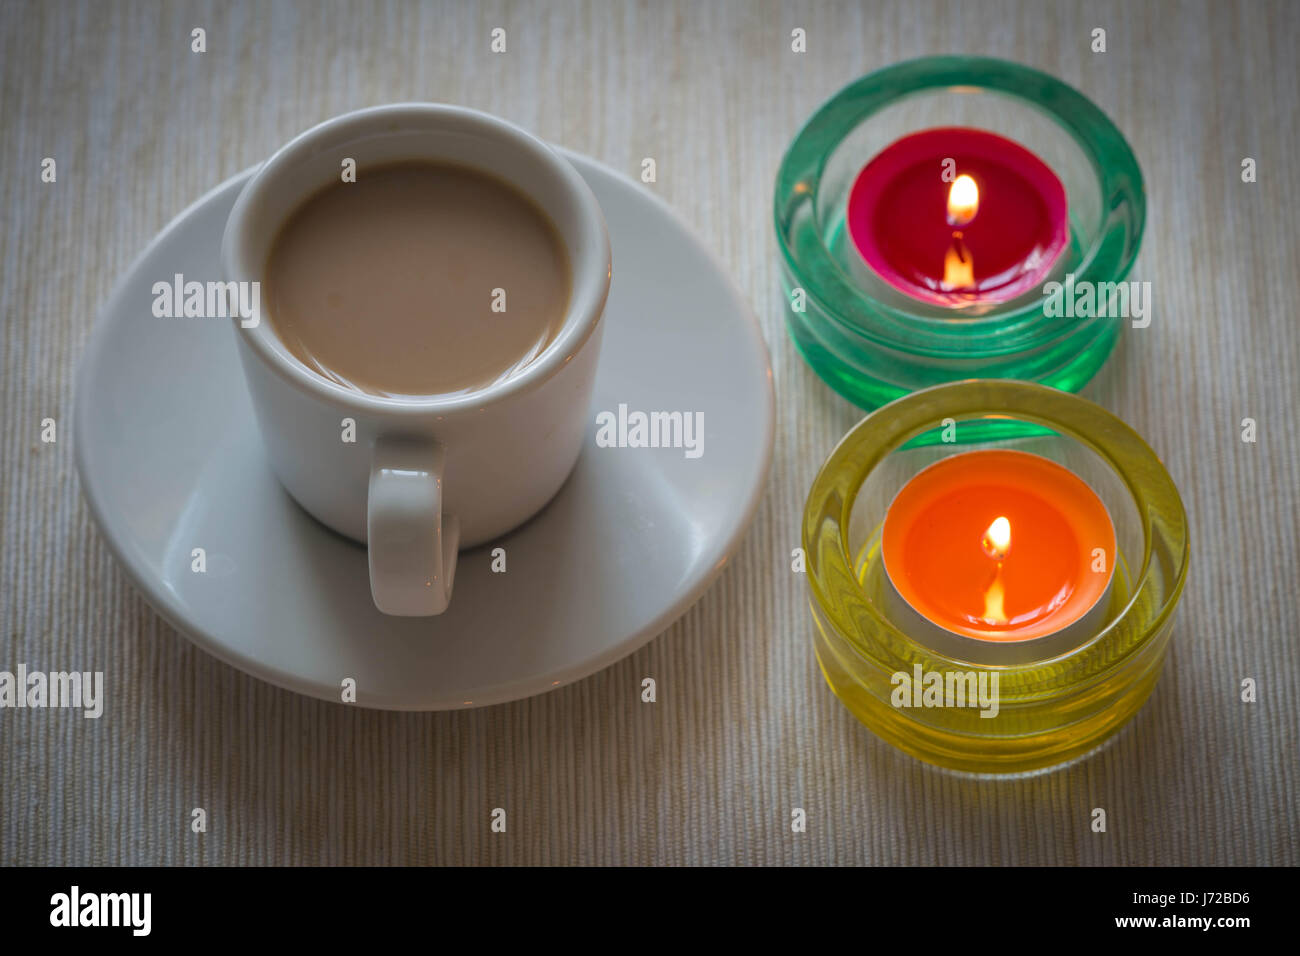 Homemade cup of coffee surrounded by candles / hygge time Stock Photo